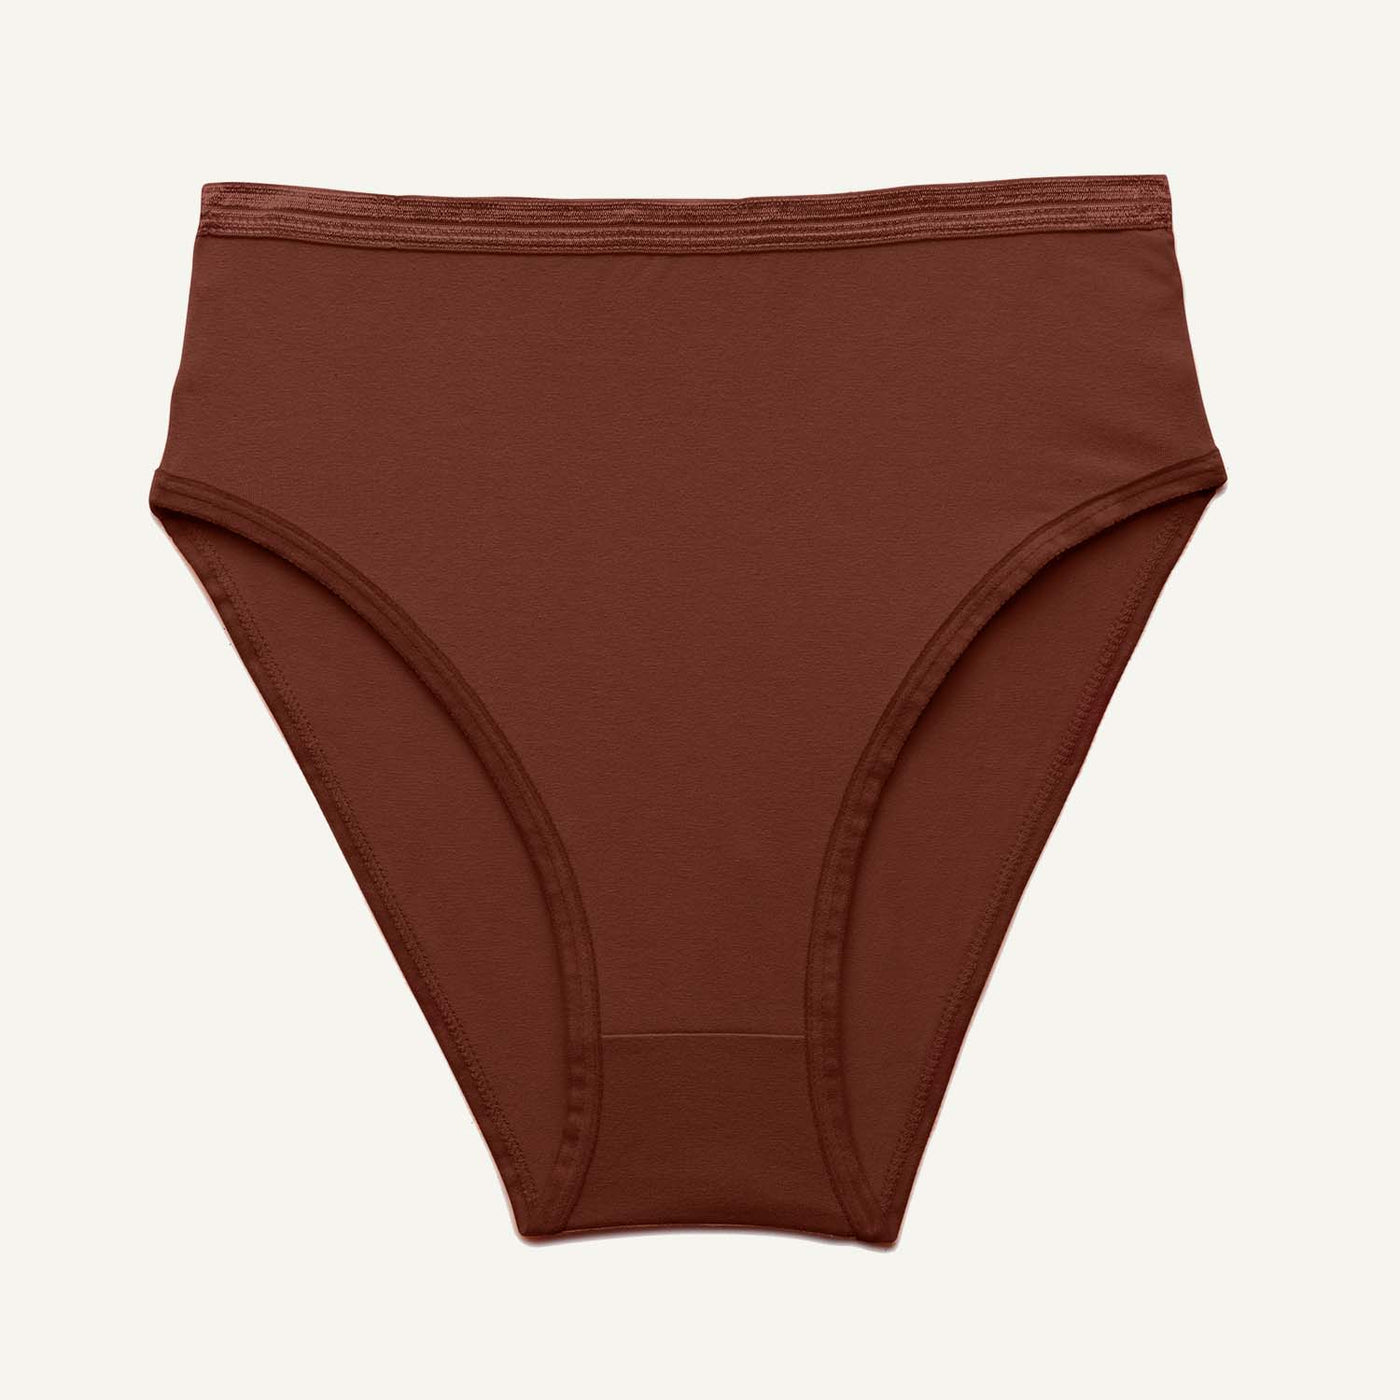 Subset Organic Cotton Women's High-Rise Brief: In sizes 2XS-4XL